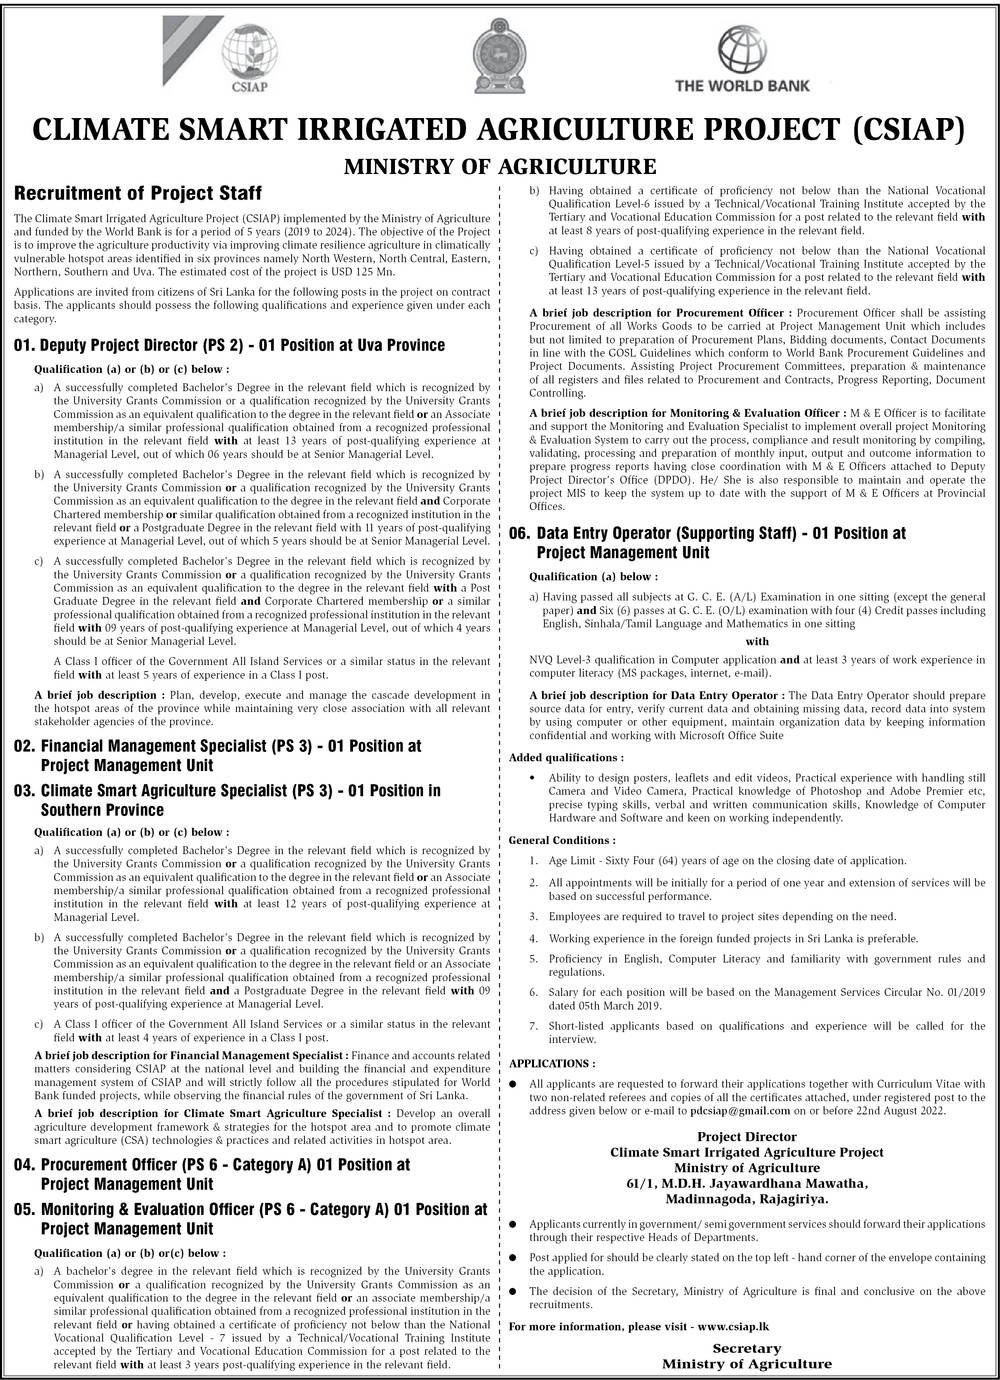 You are currently viewing Procurement Officer / Monitoring & Evaluation Officer